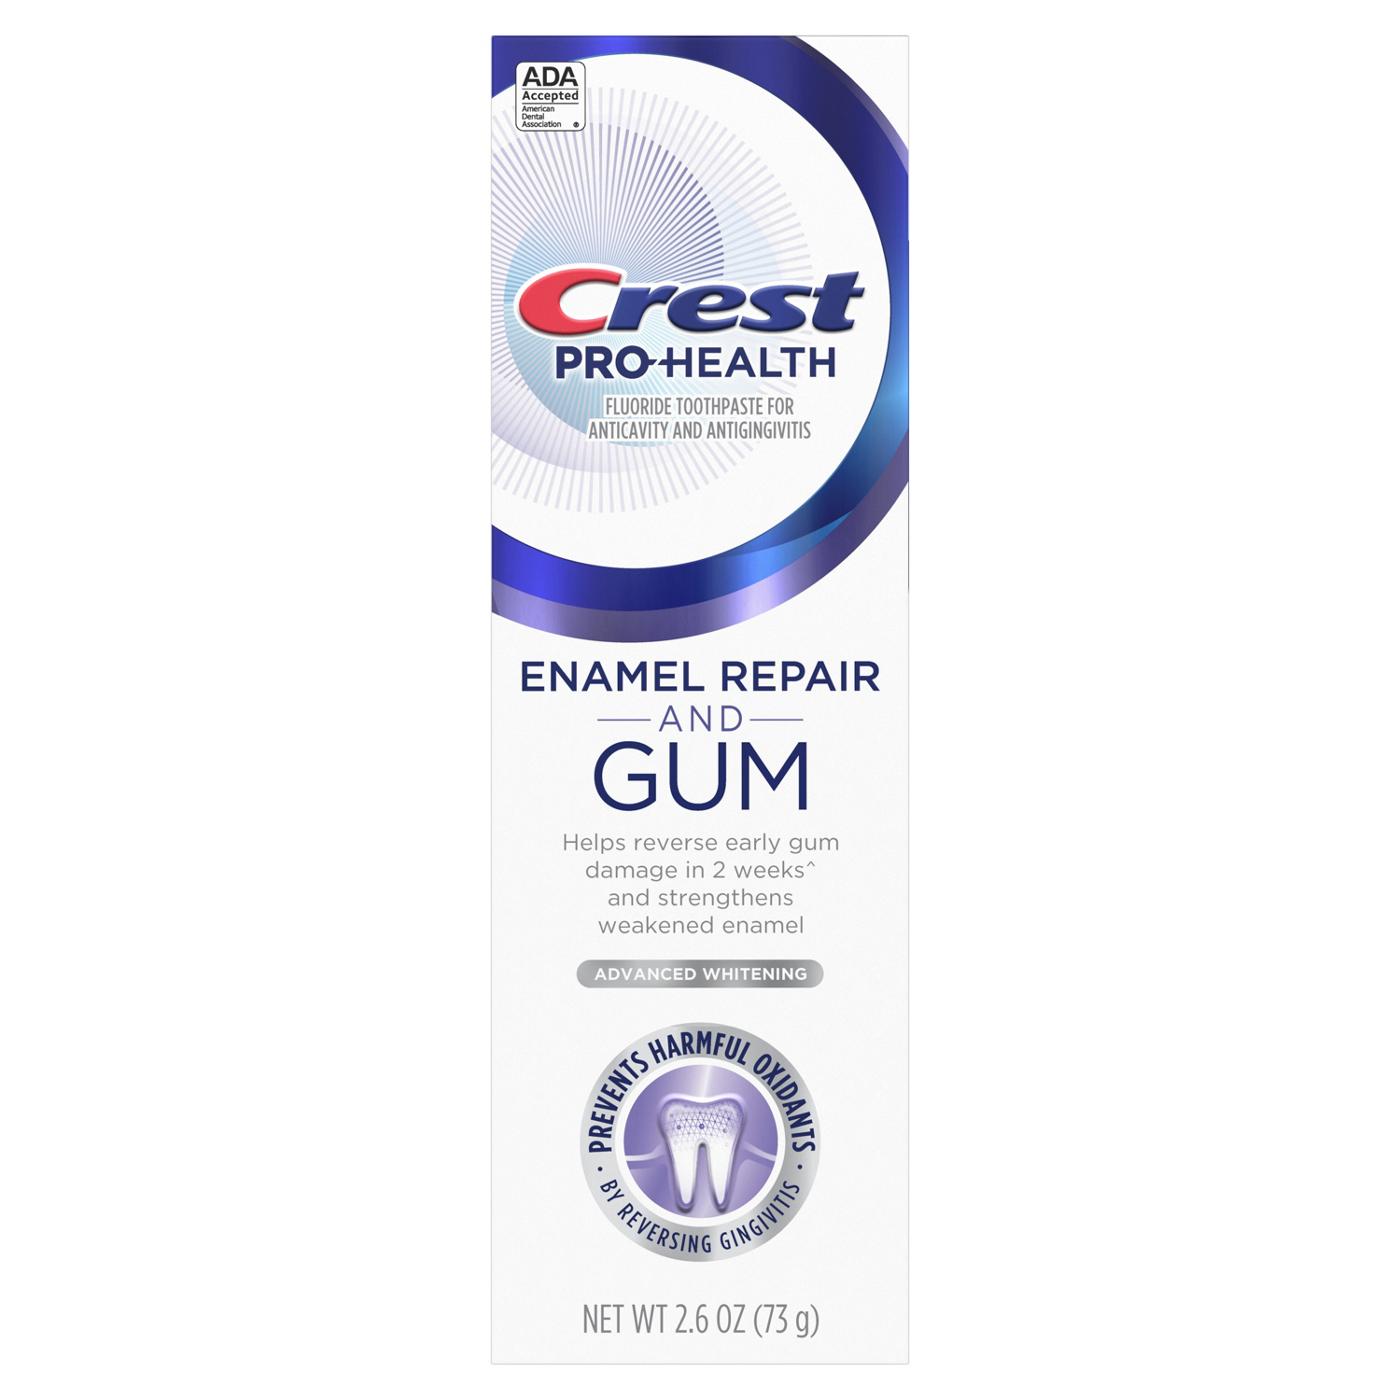 Crest Pro Health Enamel Repair and Gum Toothpaste - Advance Whitening; image 3 of 5